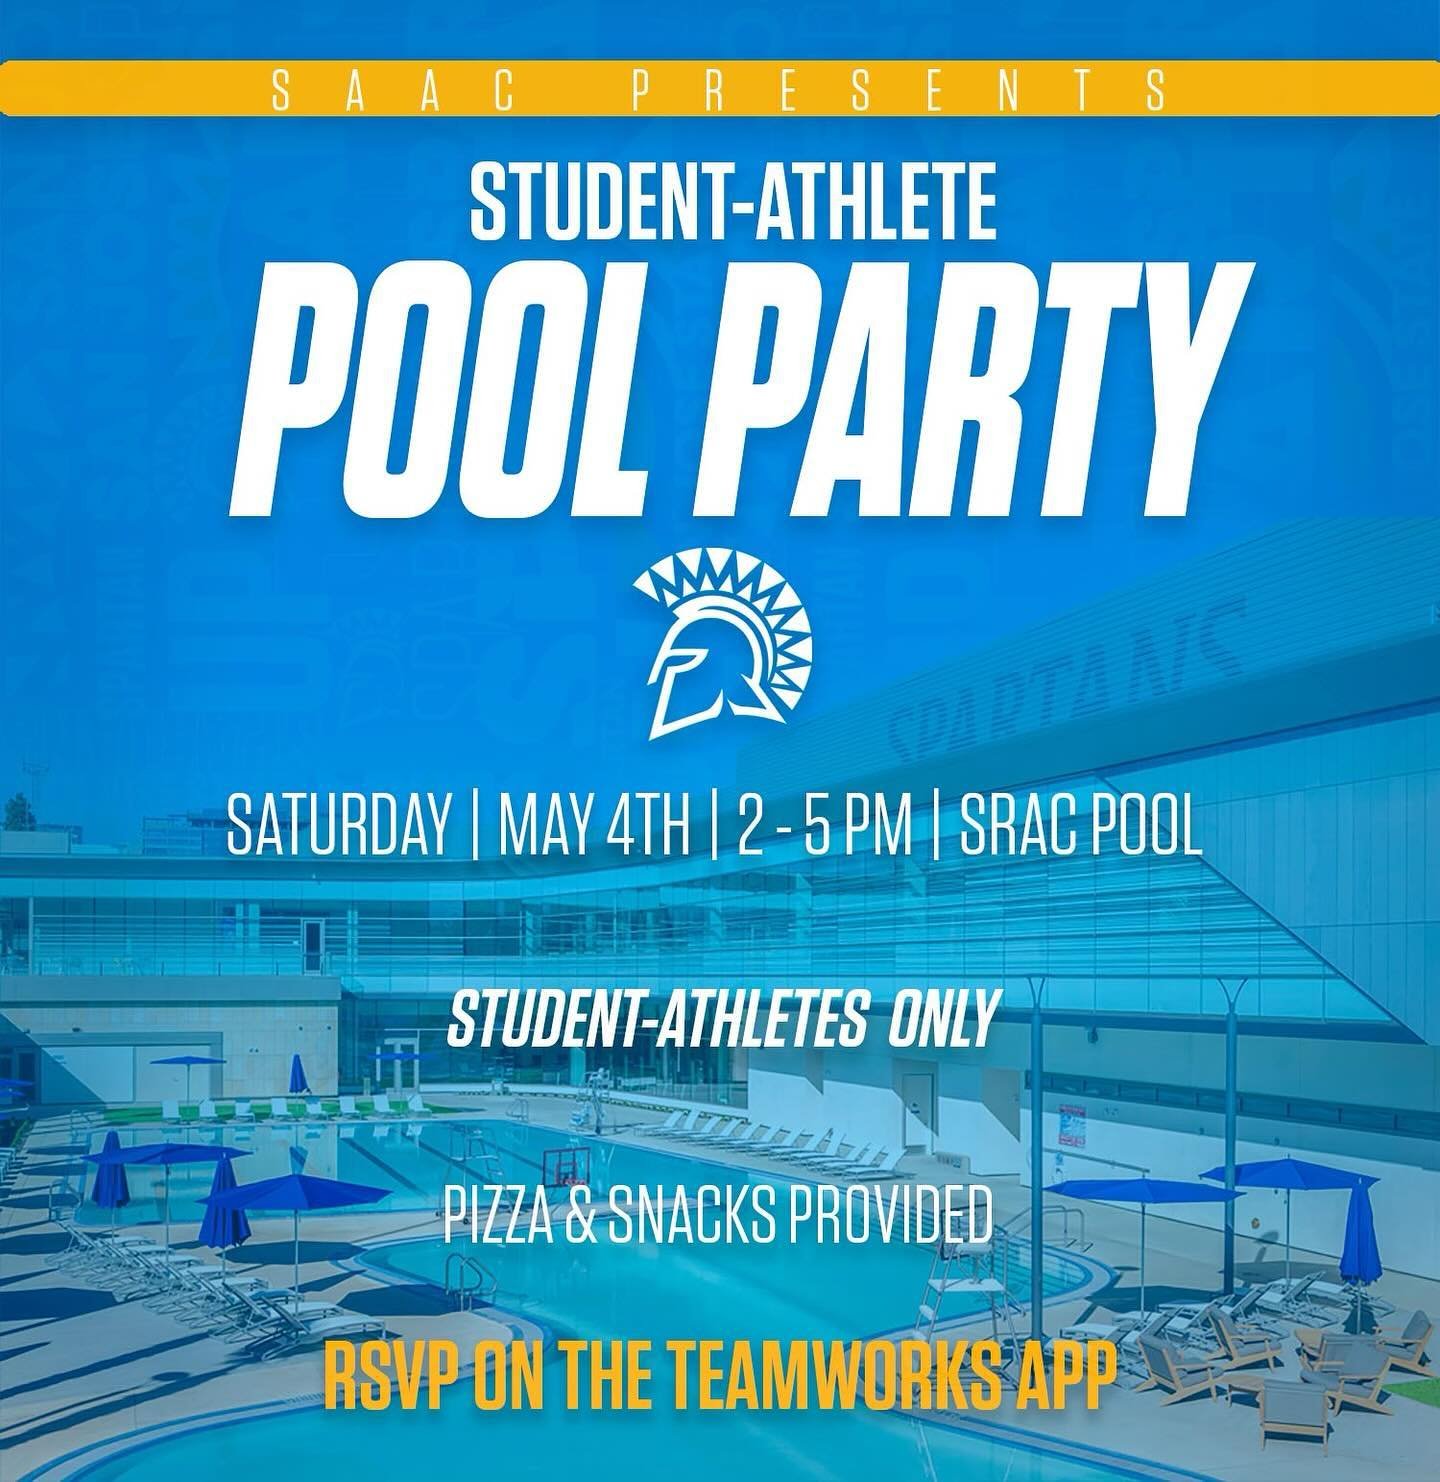 The Annual Student-Athlete Pool Party is finally here! 
RSVP on the Teamworks App so you don&rsquo;t miss out on this fun day! ☀️

📆 May 4th 
⏰ 2:00pm-5:00pm
📍SRAC POOL 

#AllSpartans | #sjsusaac